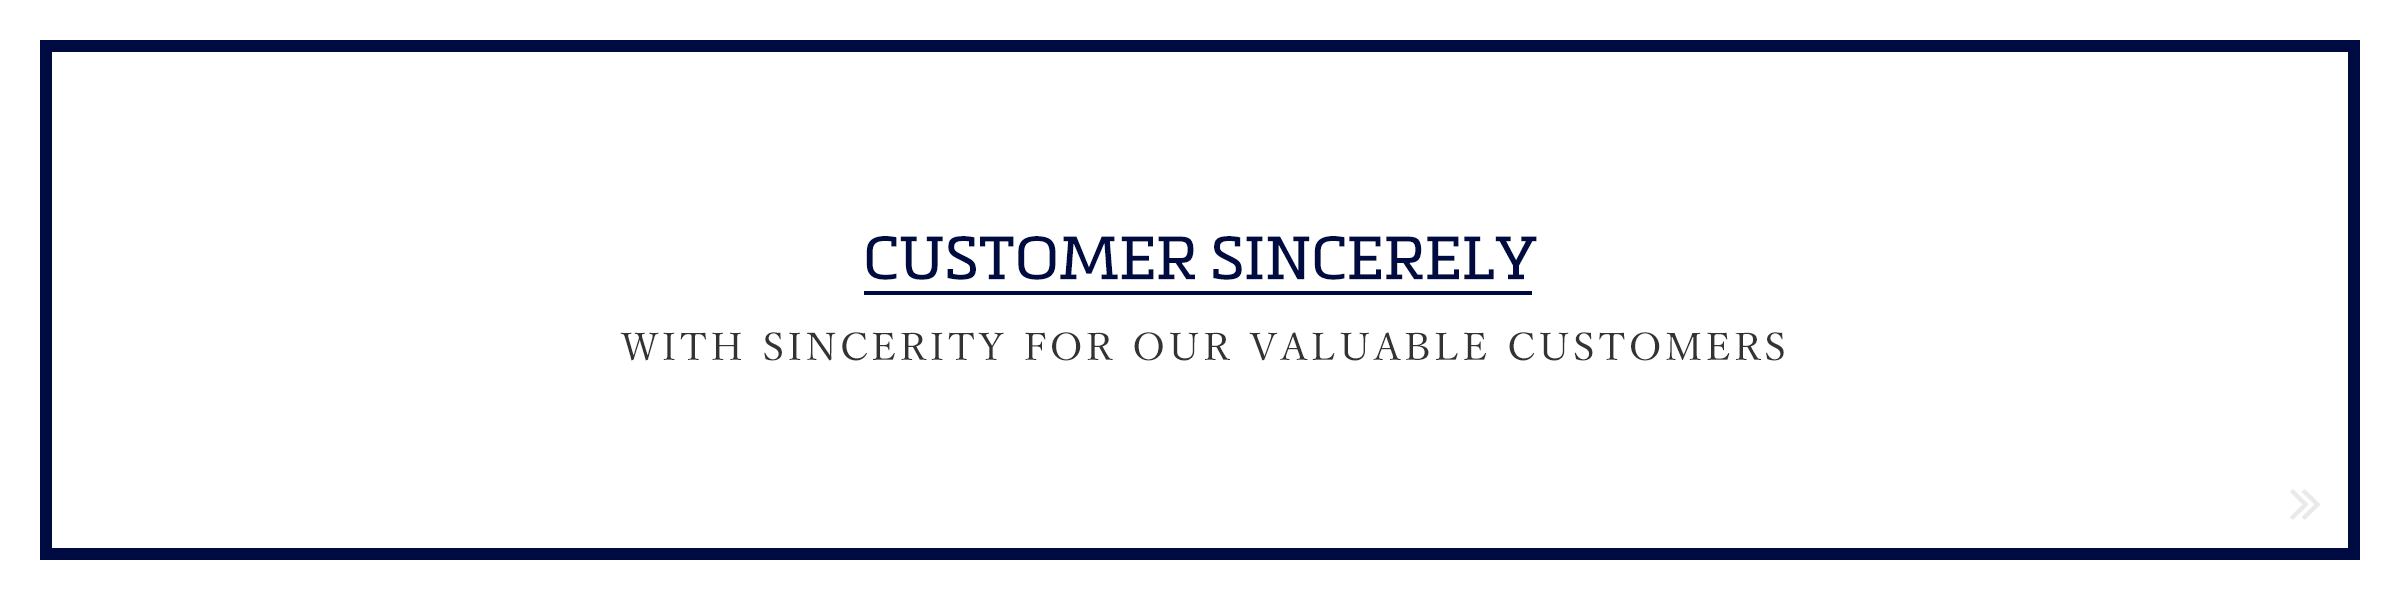 CUSTOMER SINCERELY / WITH SINCERITY FOR OUR VALUABLE CUSTOMERS